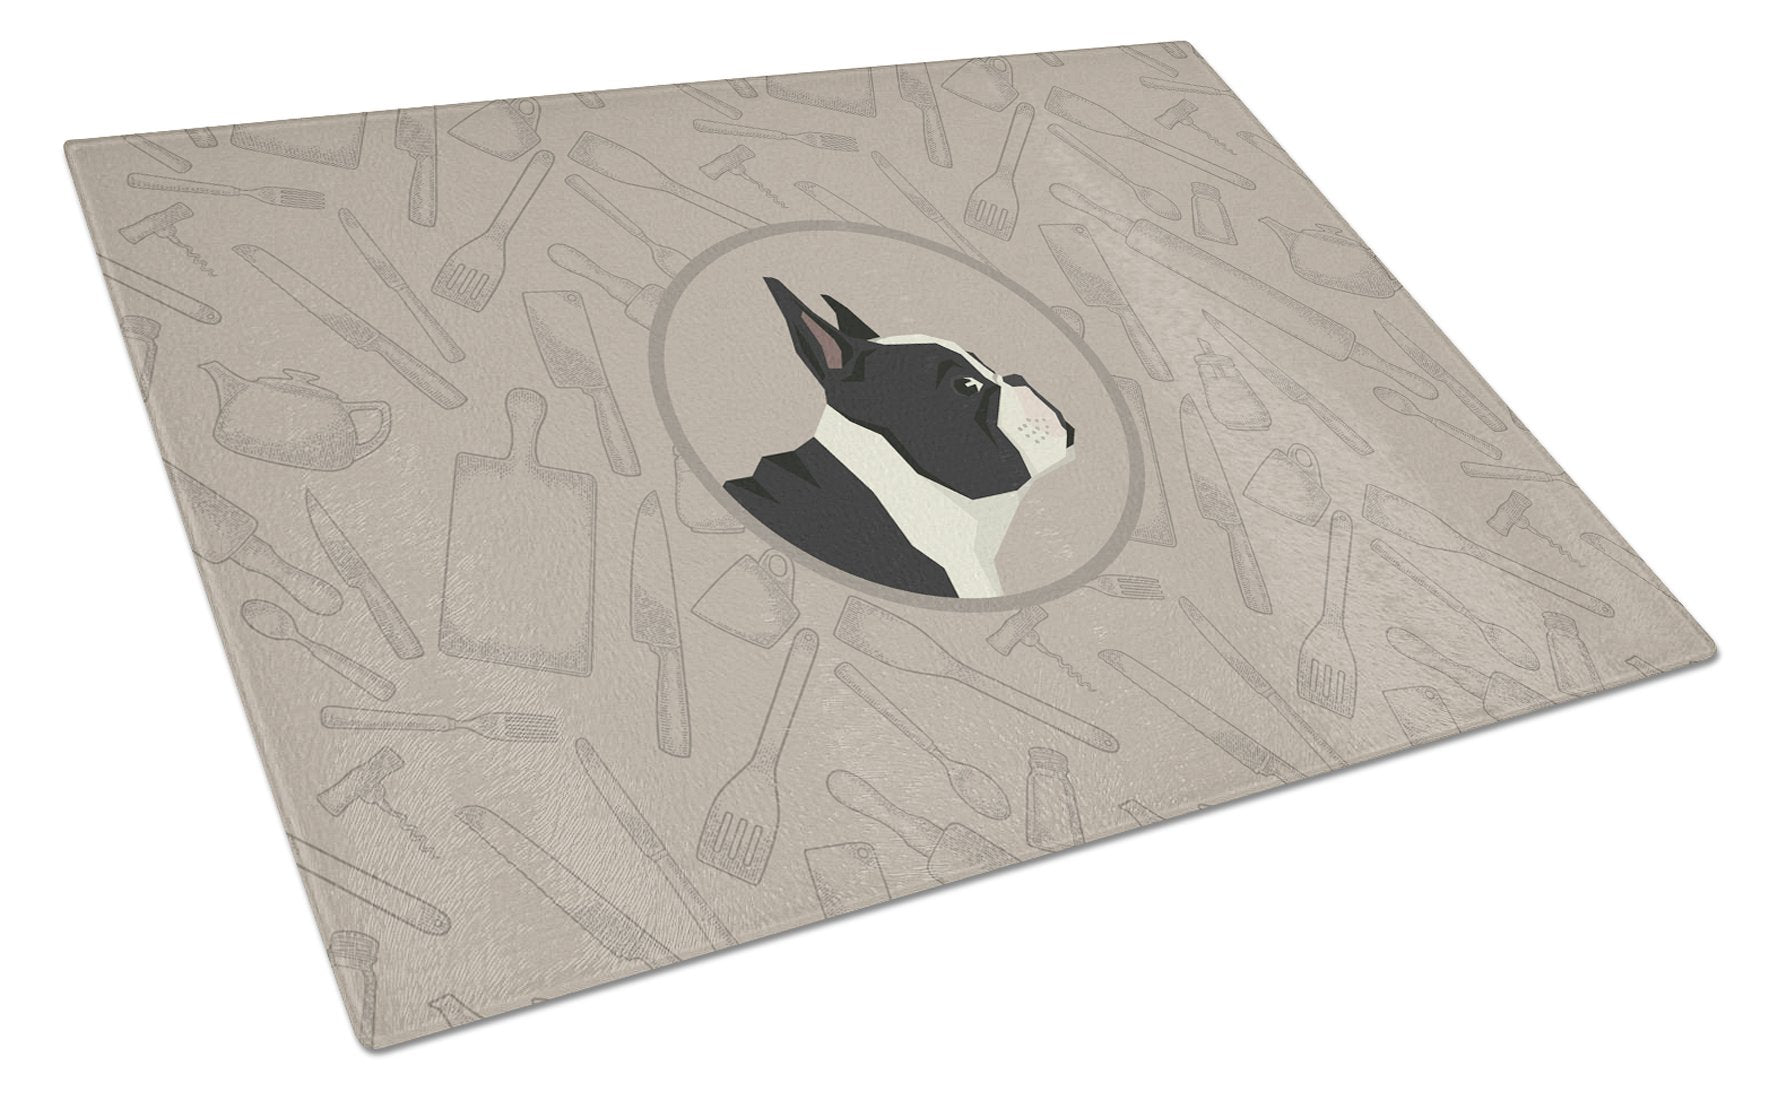 French Bulldog In the Kitchen Glass Cutting Board Large CK2186LCB by Caroline's Treasures